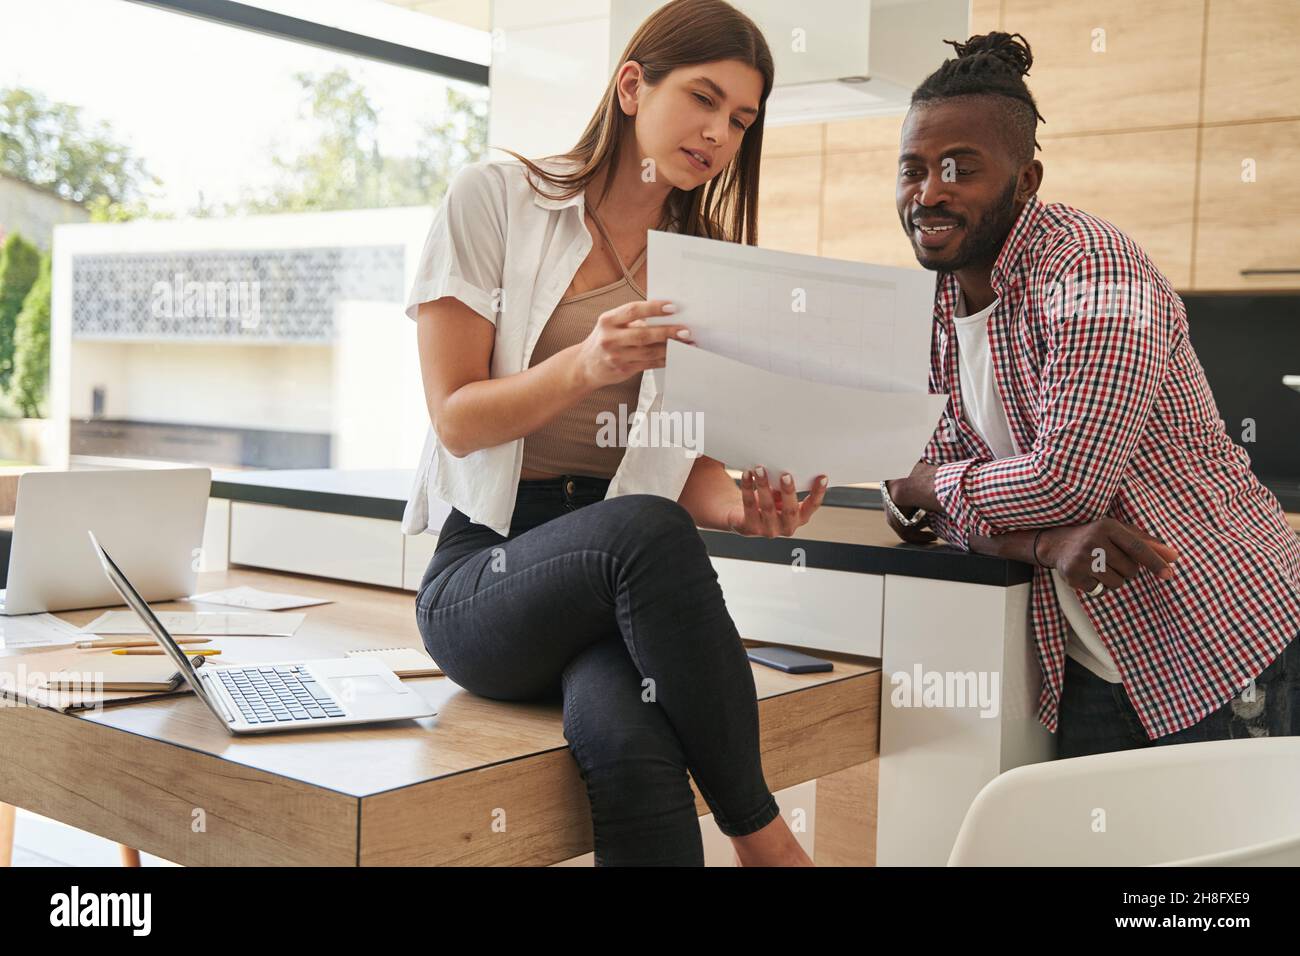 Focused woman and pleased man scrutinizing documents Stock Photo